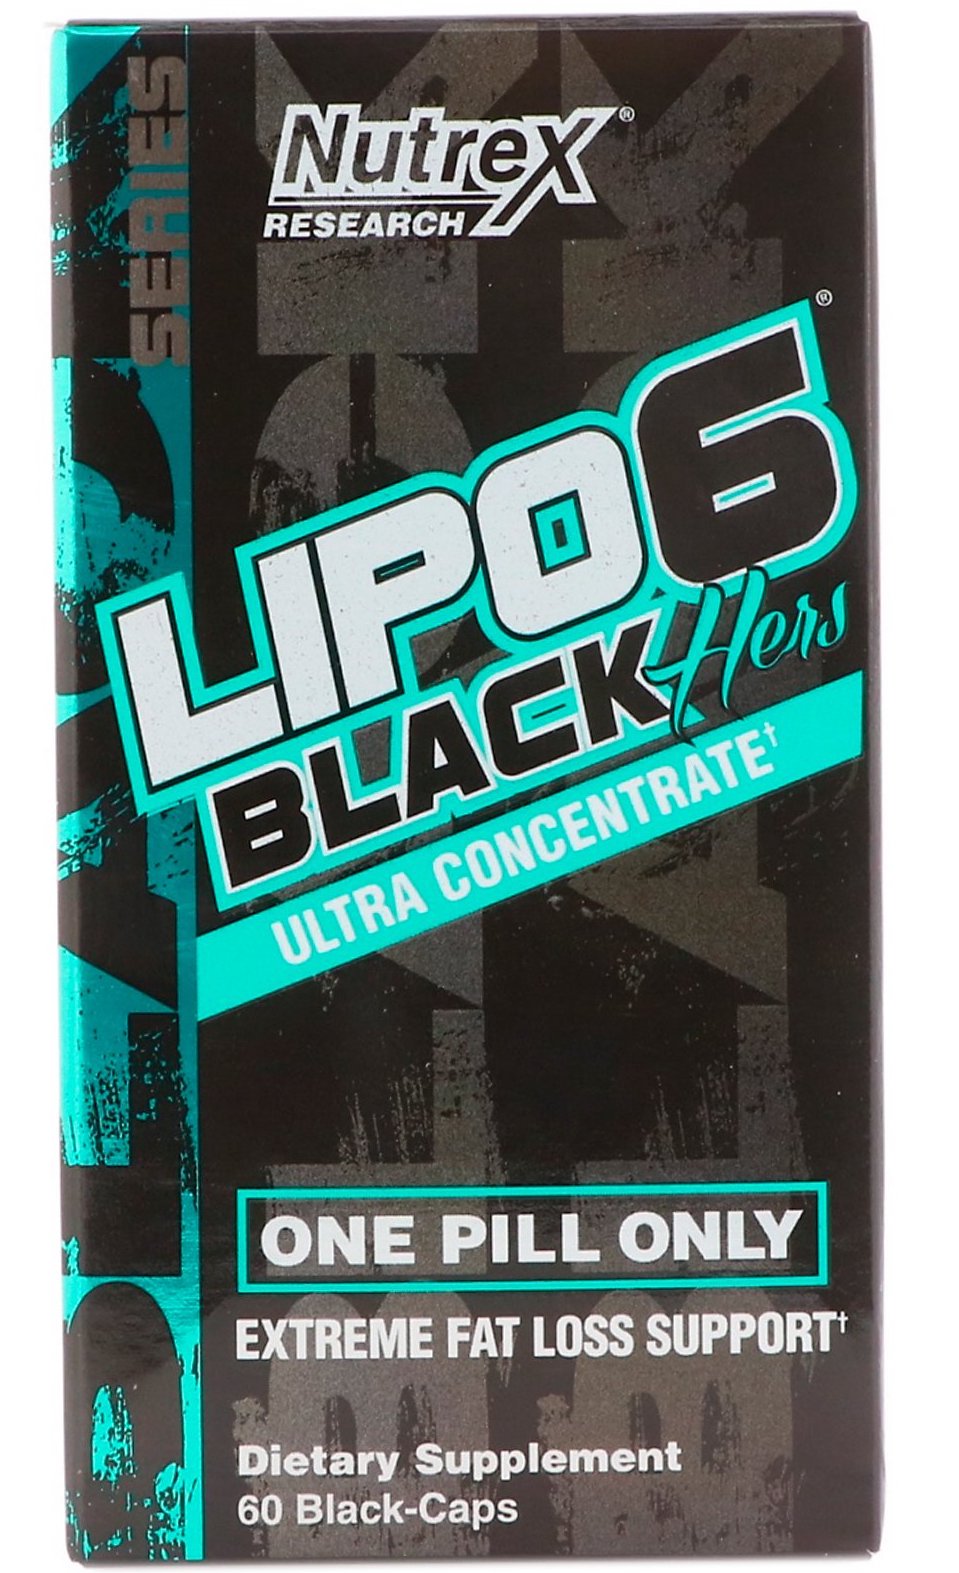 NUTREX RESEARCH Lipo-6 Black Hers